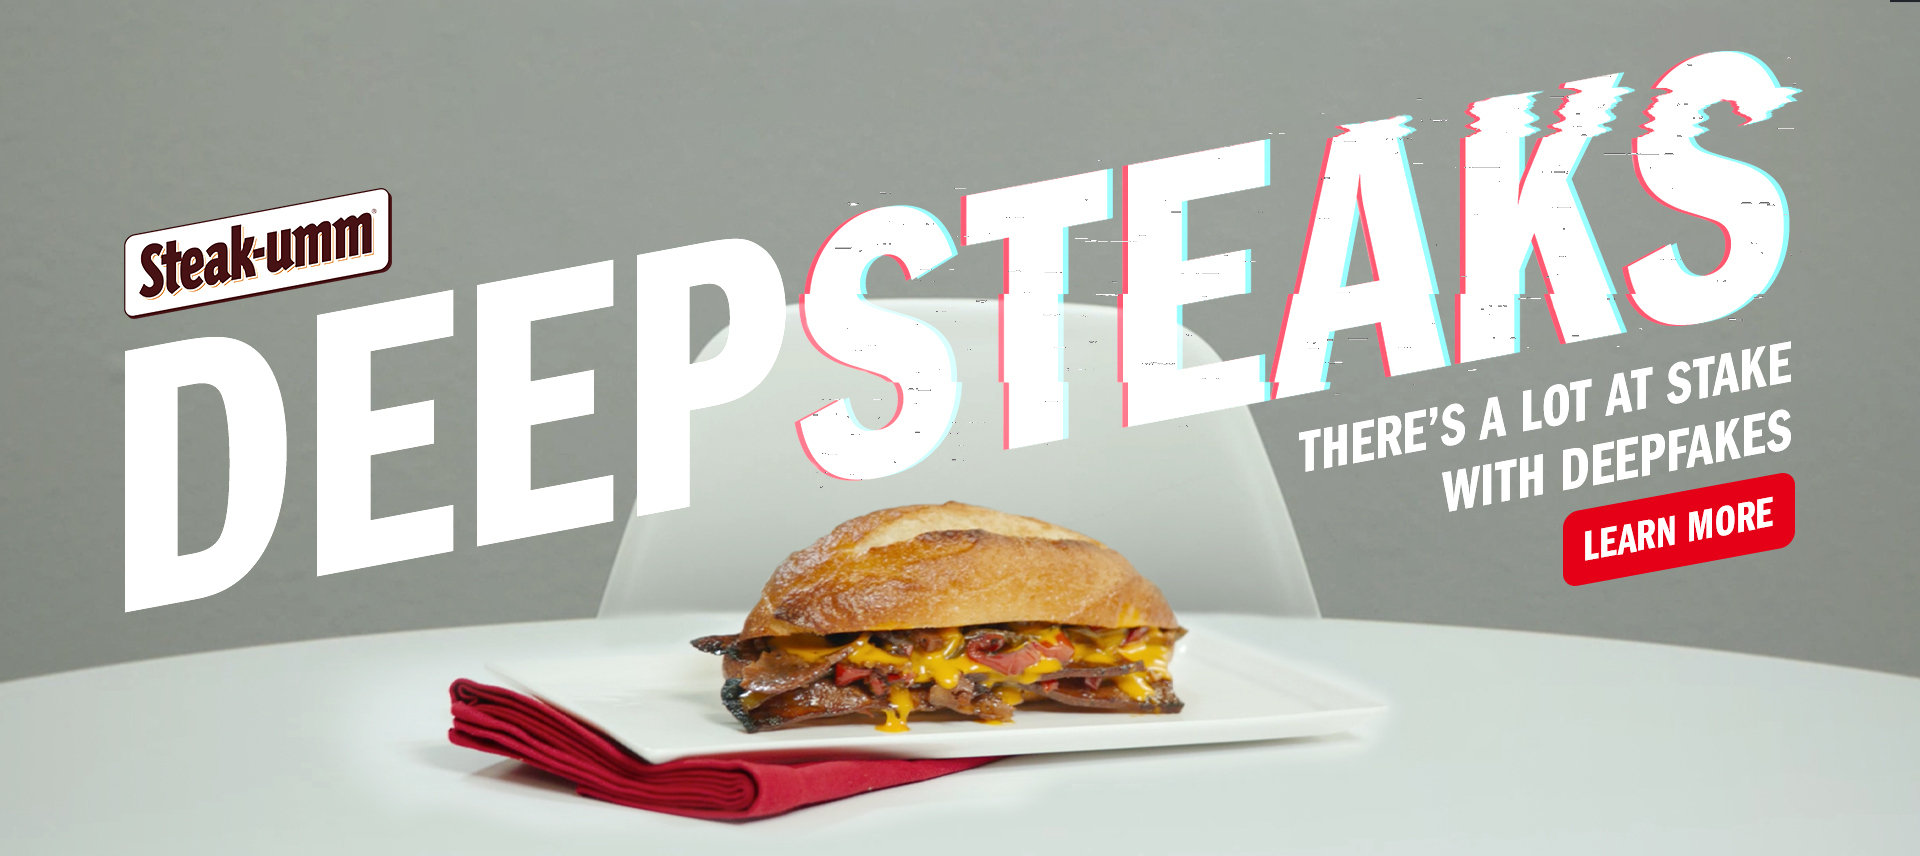 Deepsteaks: There's a lot at stake with deep fakes 